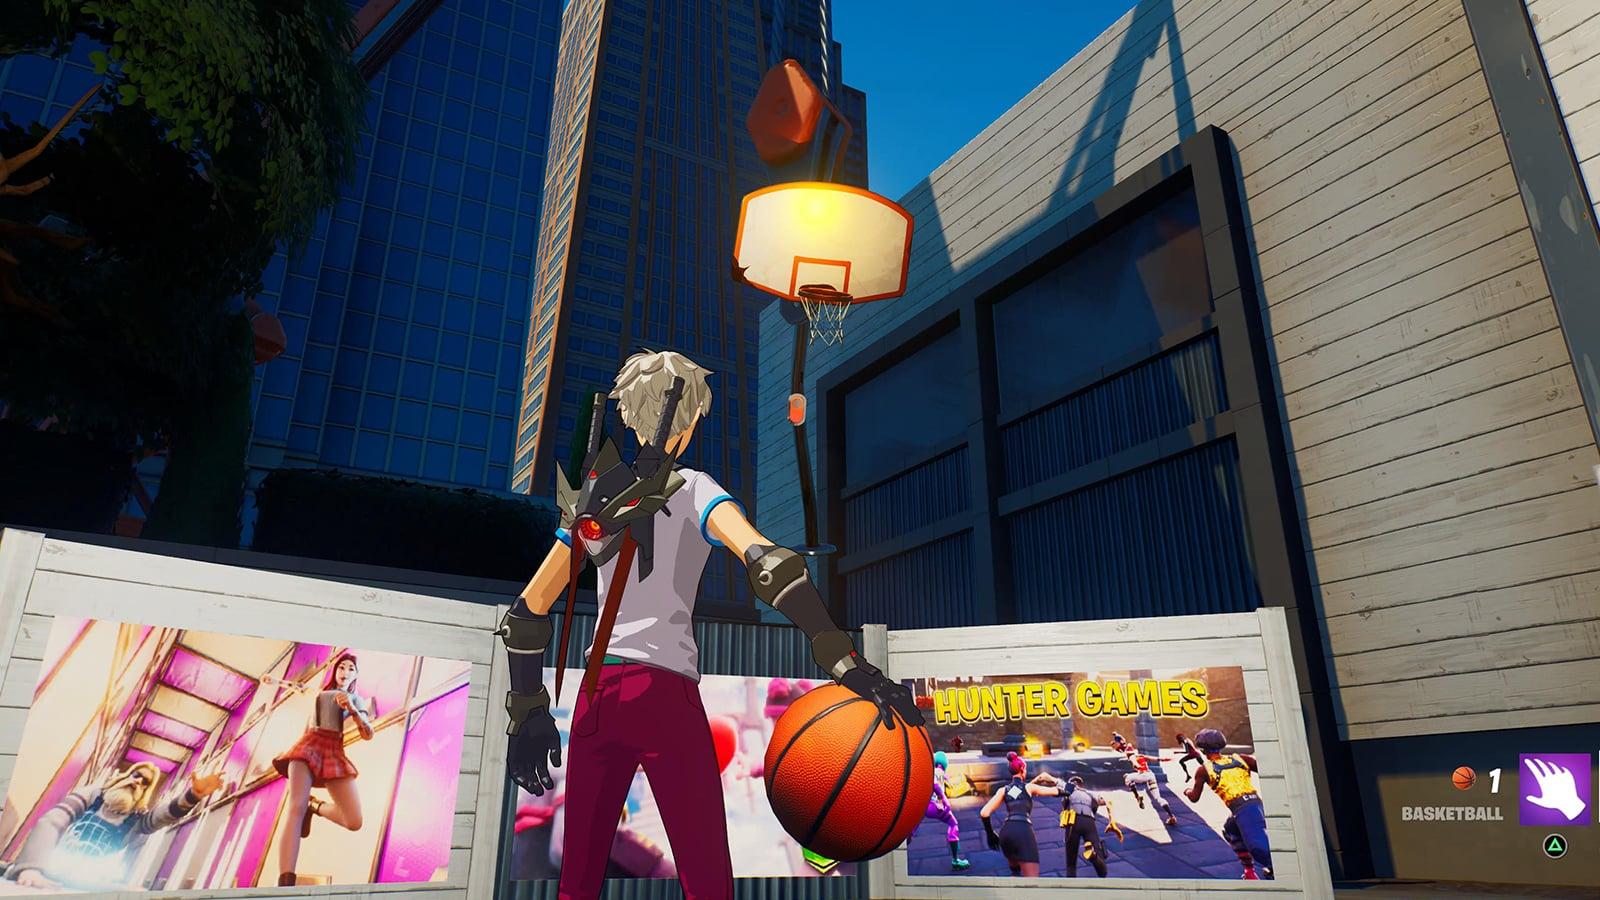 A player completing the Fortnite NBA 75 All-Star Quests by sinking basketballs